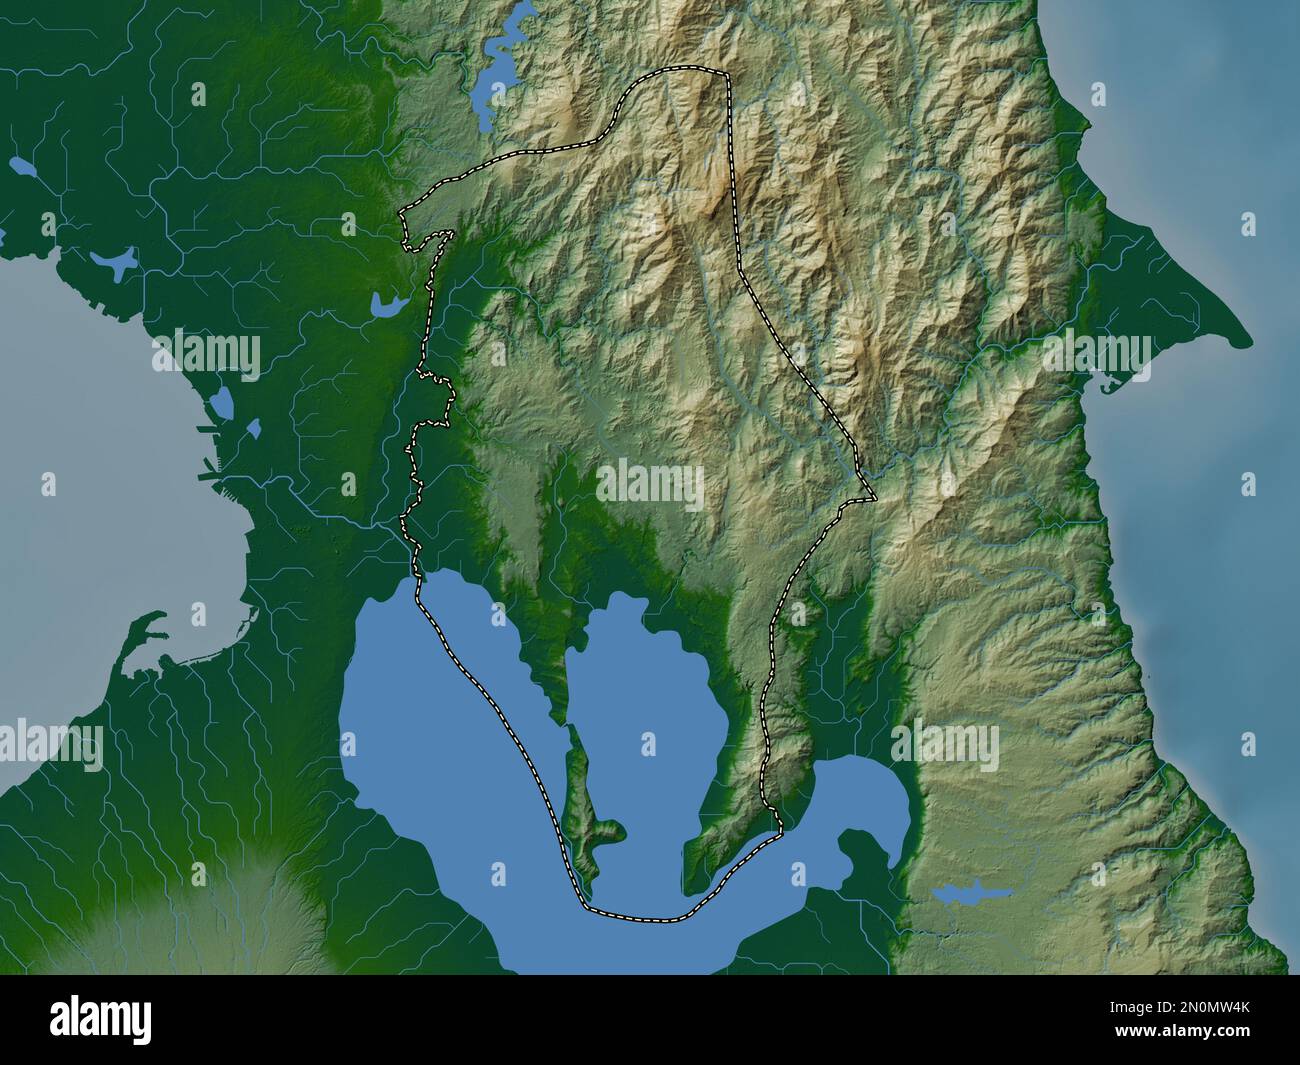 Rizal, province of Philippines. Colored elevation map with lakes and rivers Stock Photo